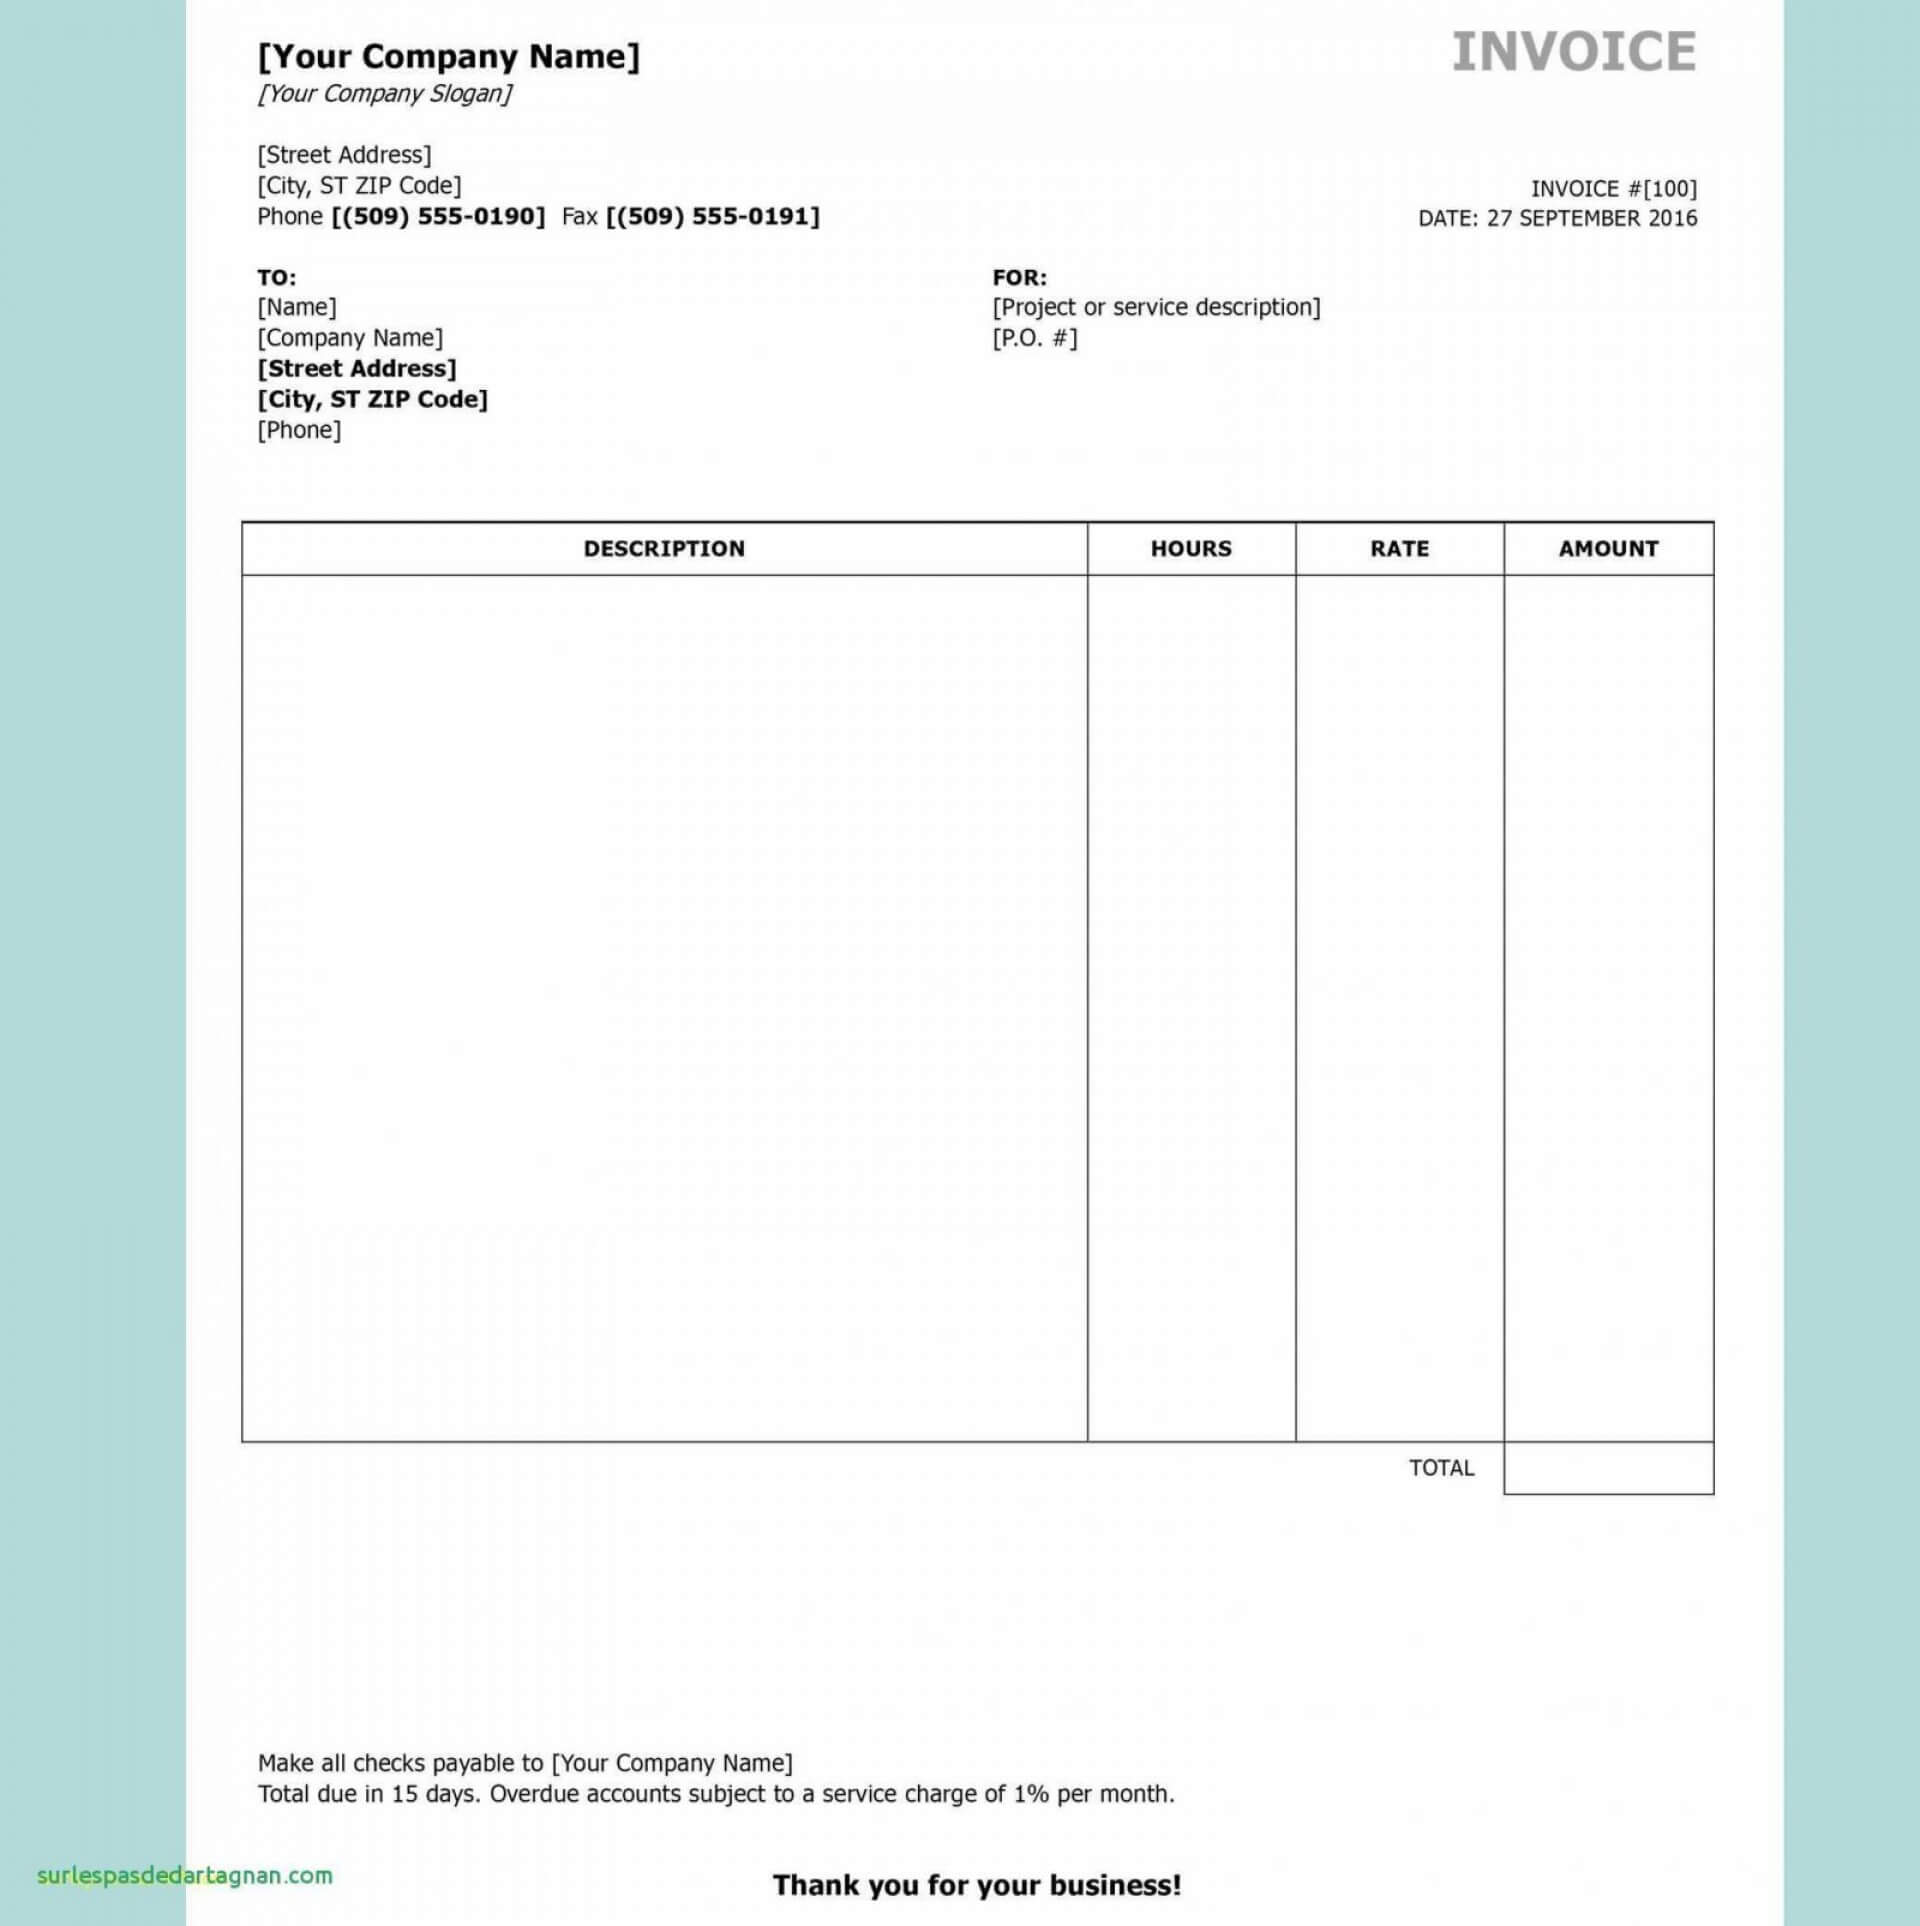 002 Simple Proforma Invoice Template Word Magnificent Ideas For Free